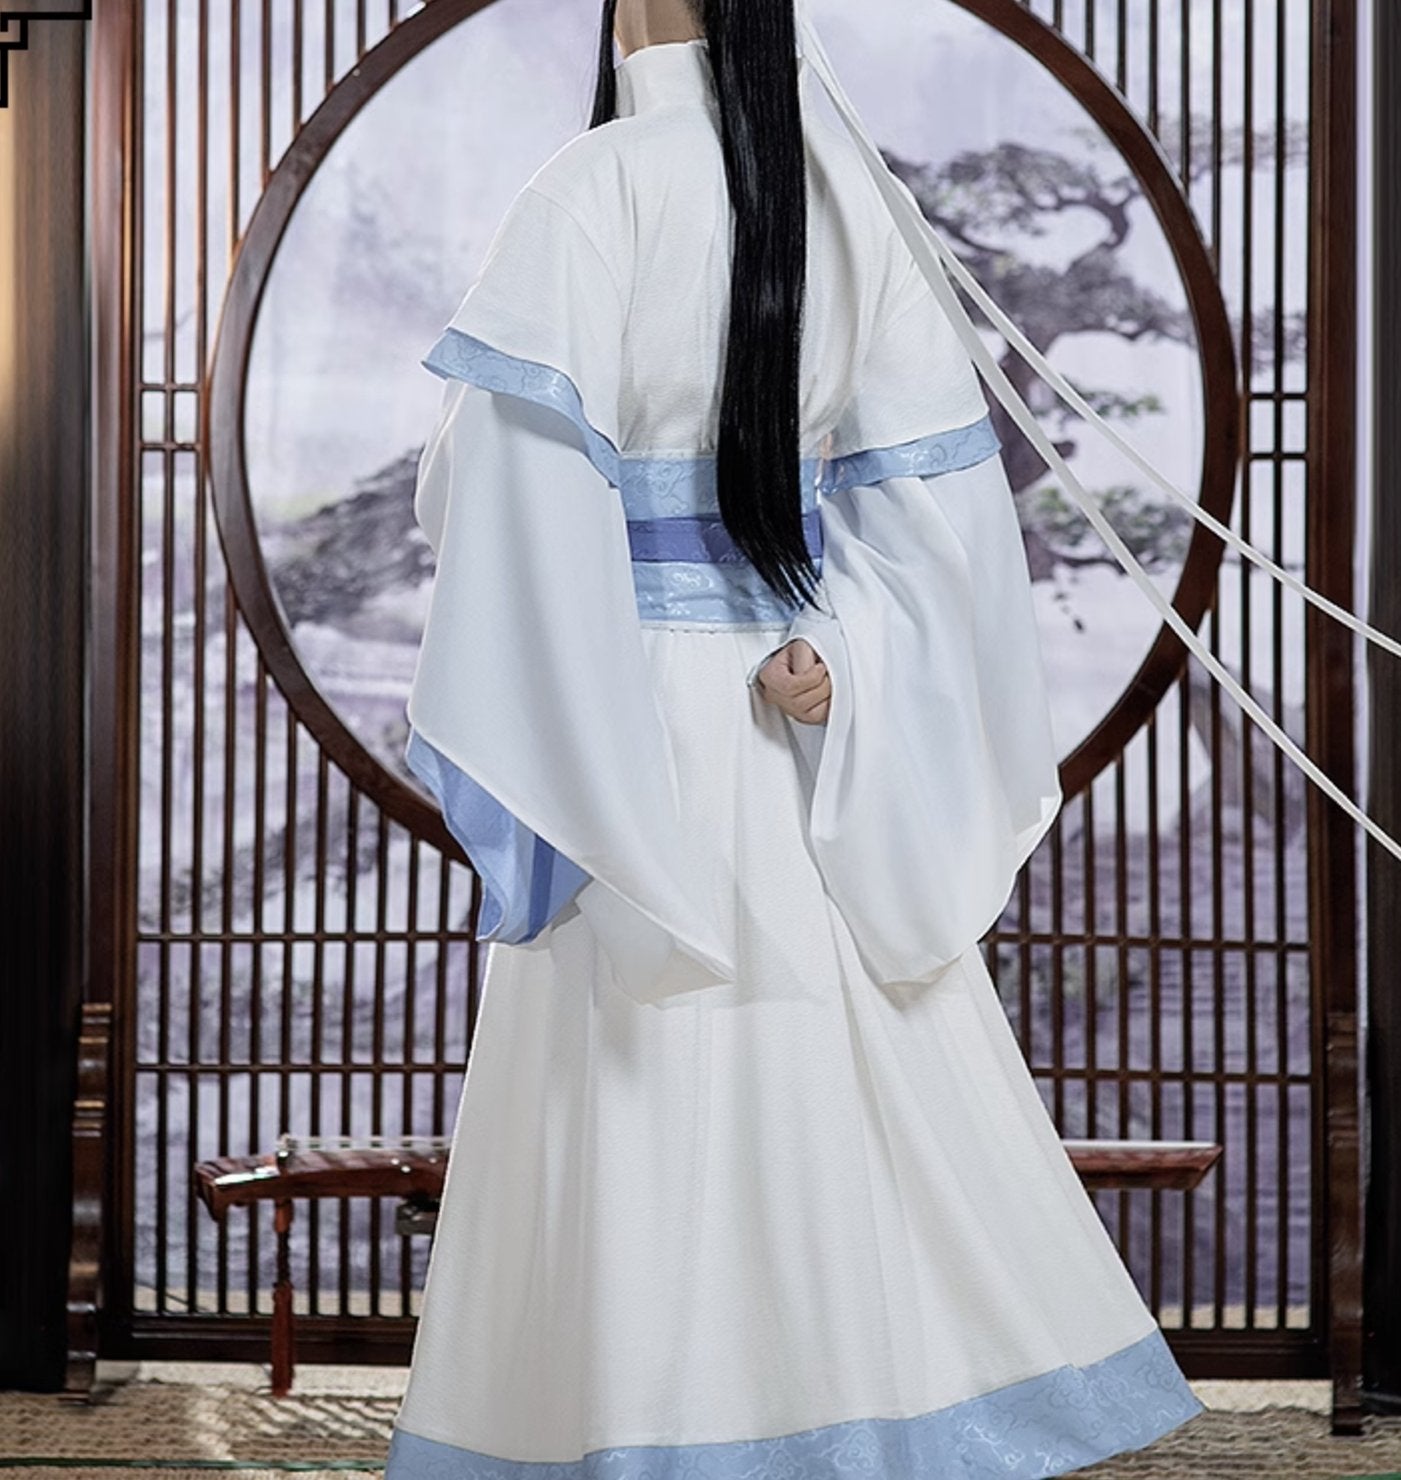 MDZS Lan Xichen Cosplay Costume Anime Suit Limited Version - COS-CO-15001 - MIAOWU COSPLAY - 42shops